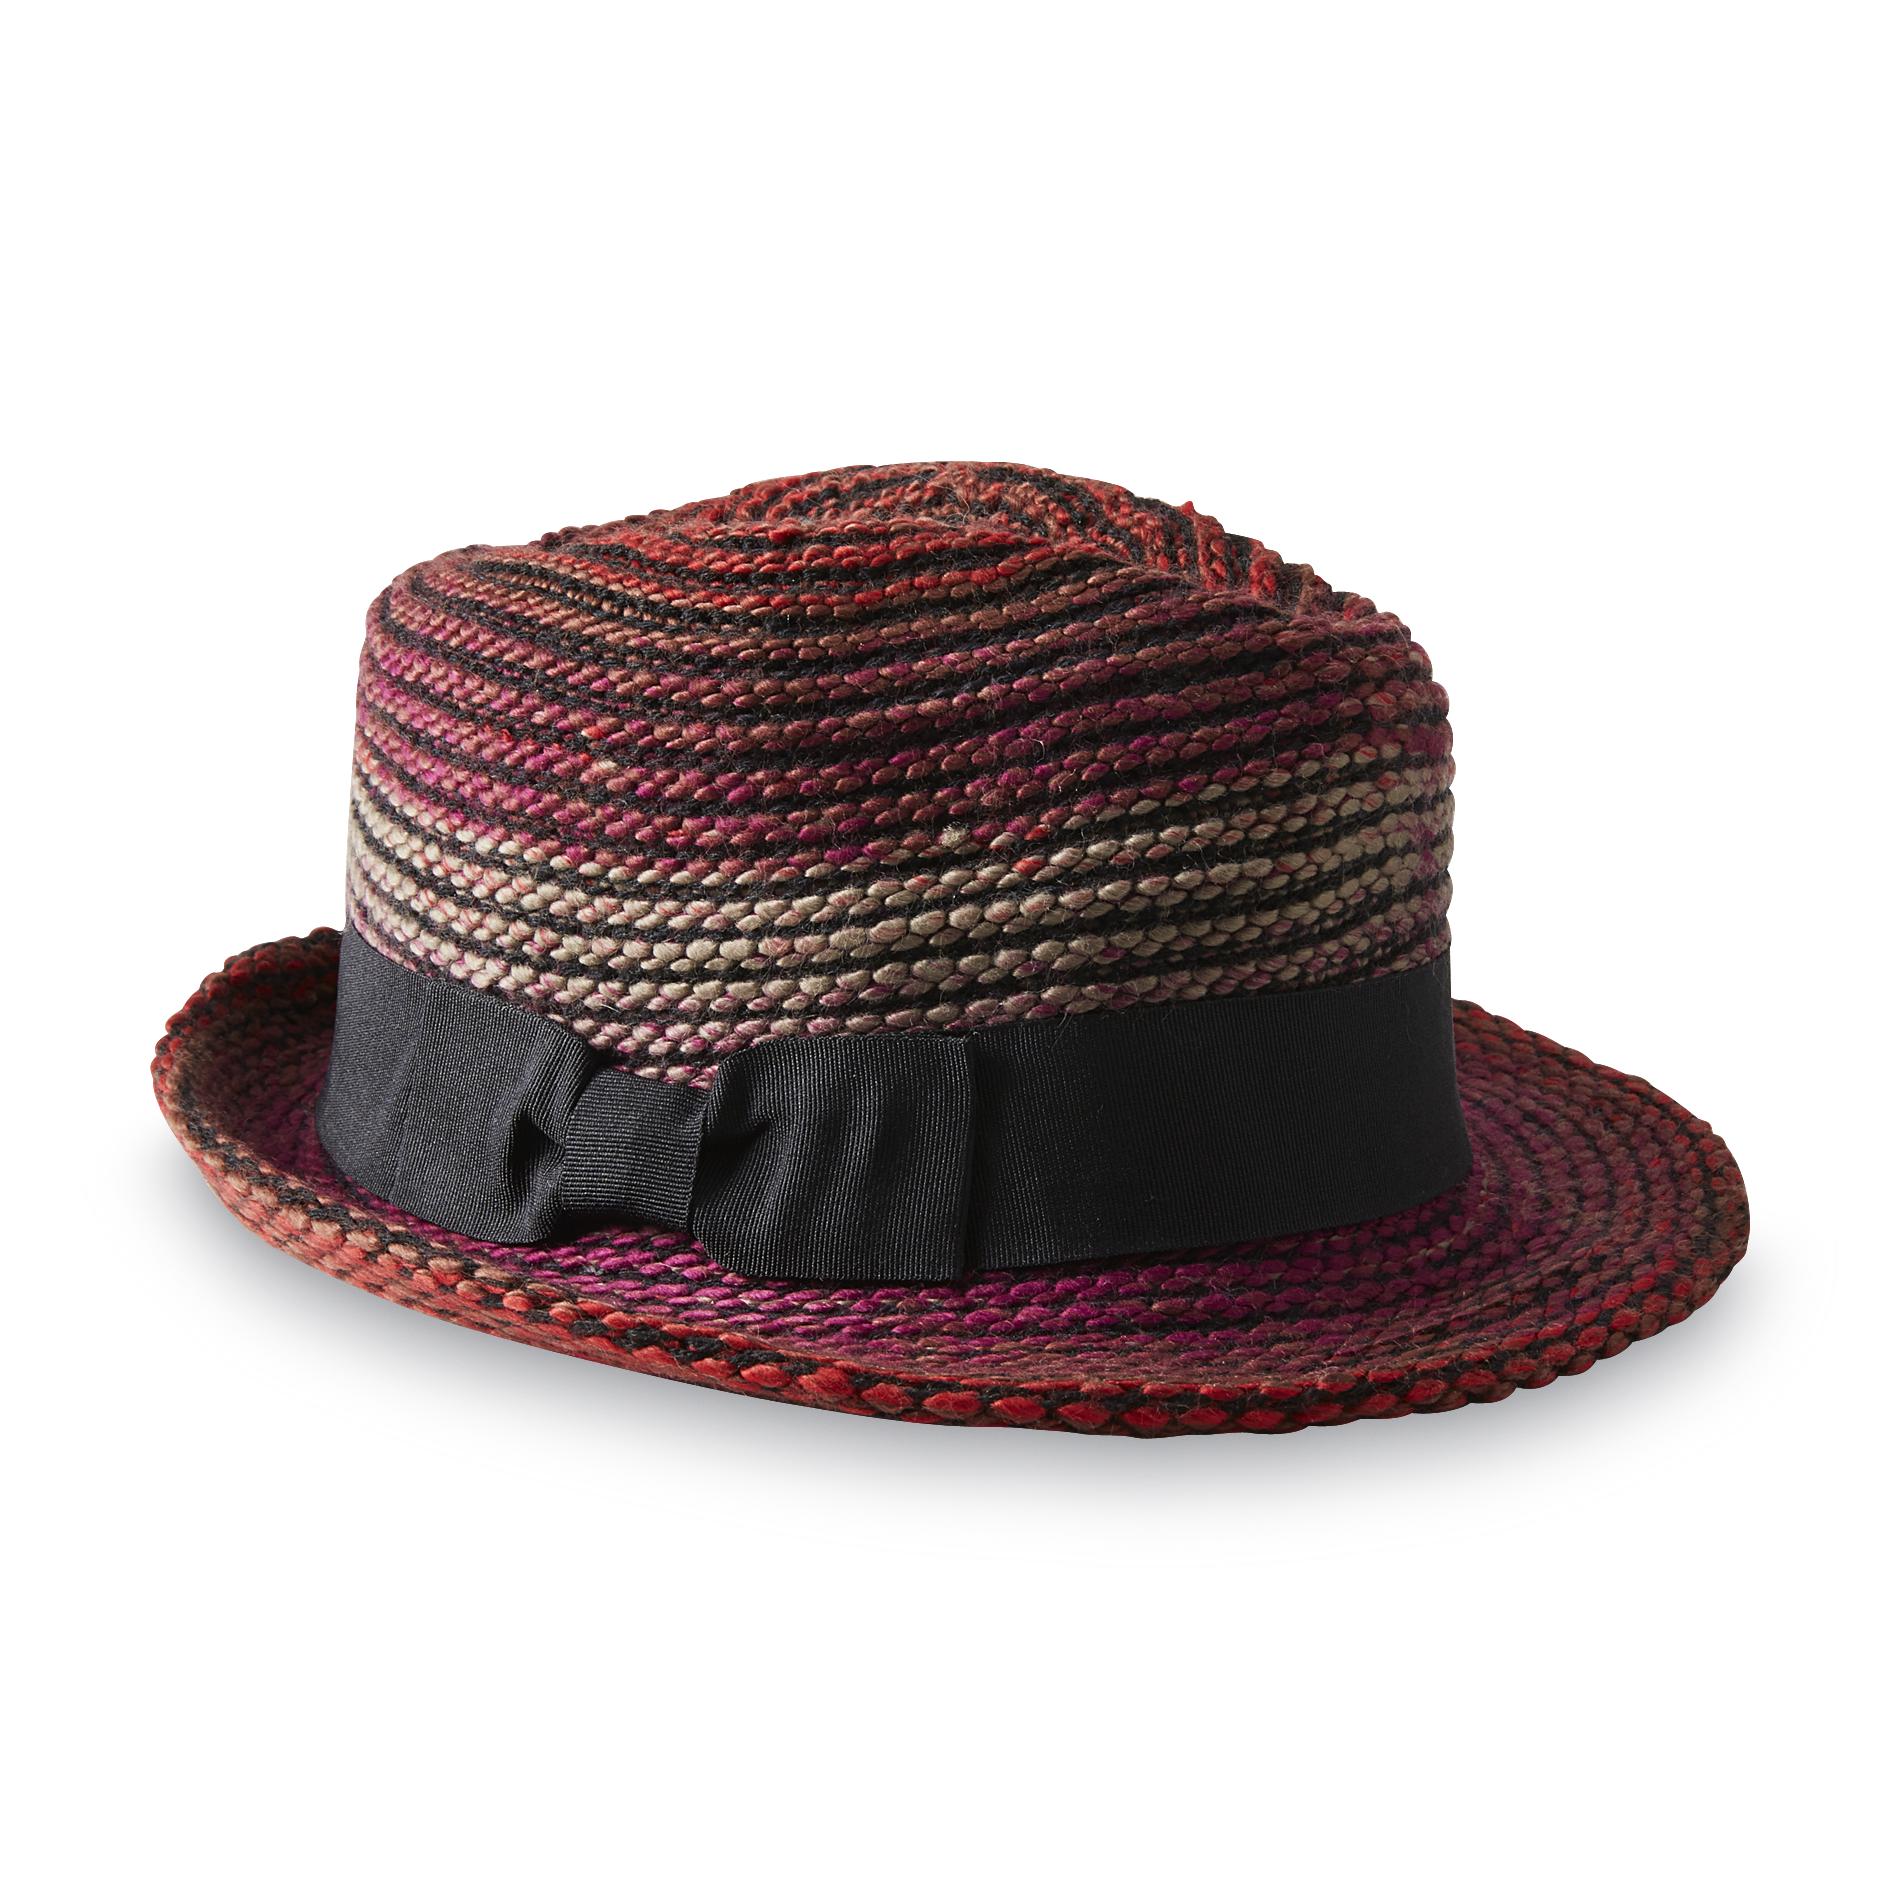 Joe Boxer Junior's Sweater Knit Banded Fedora - Striped